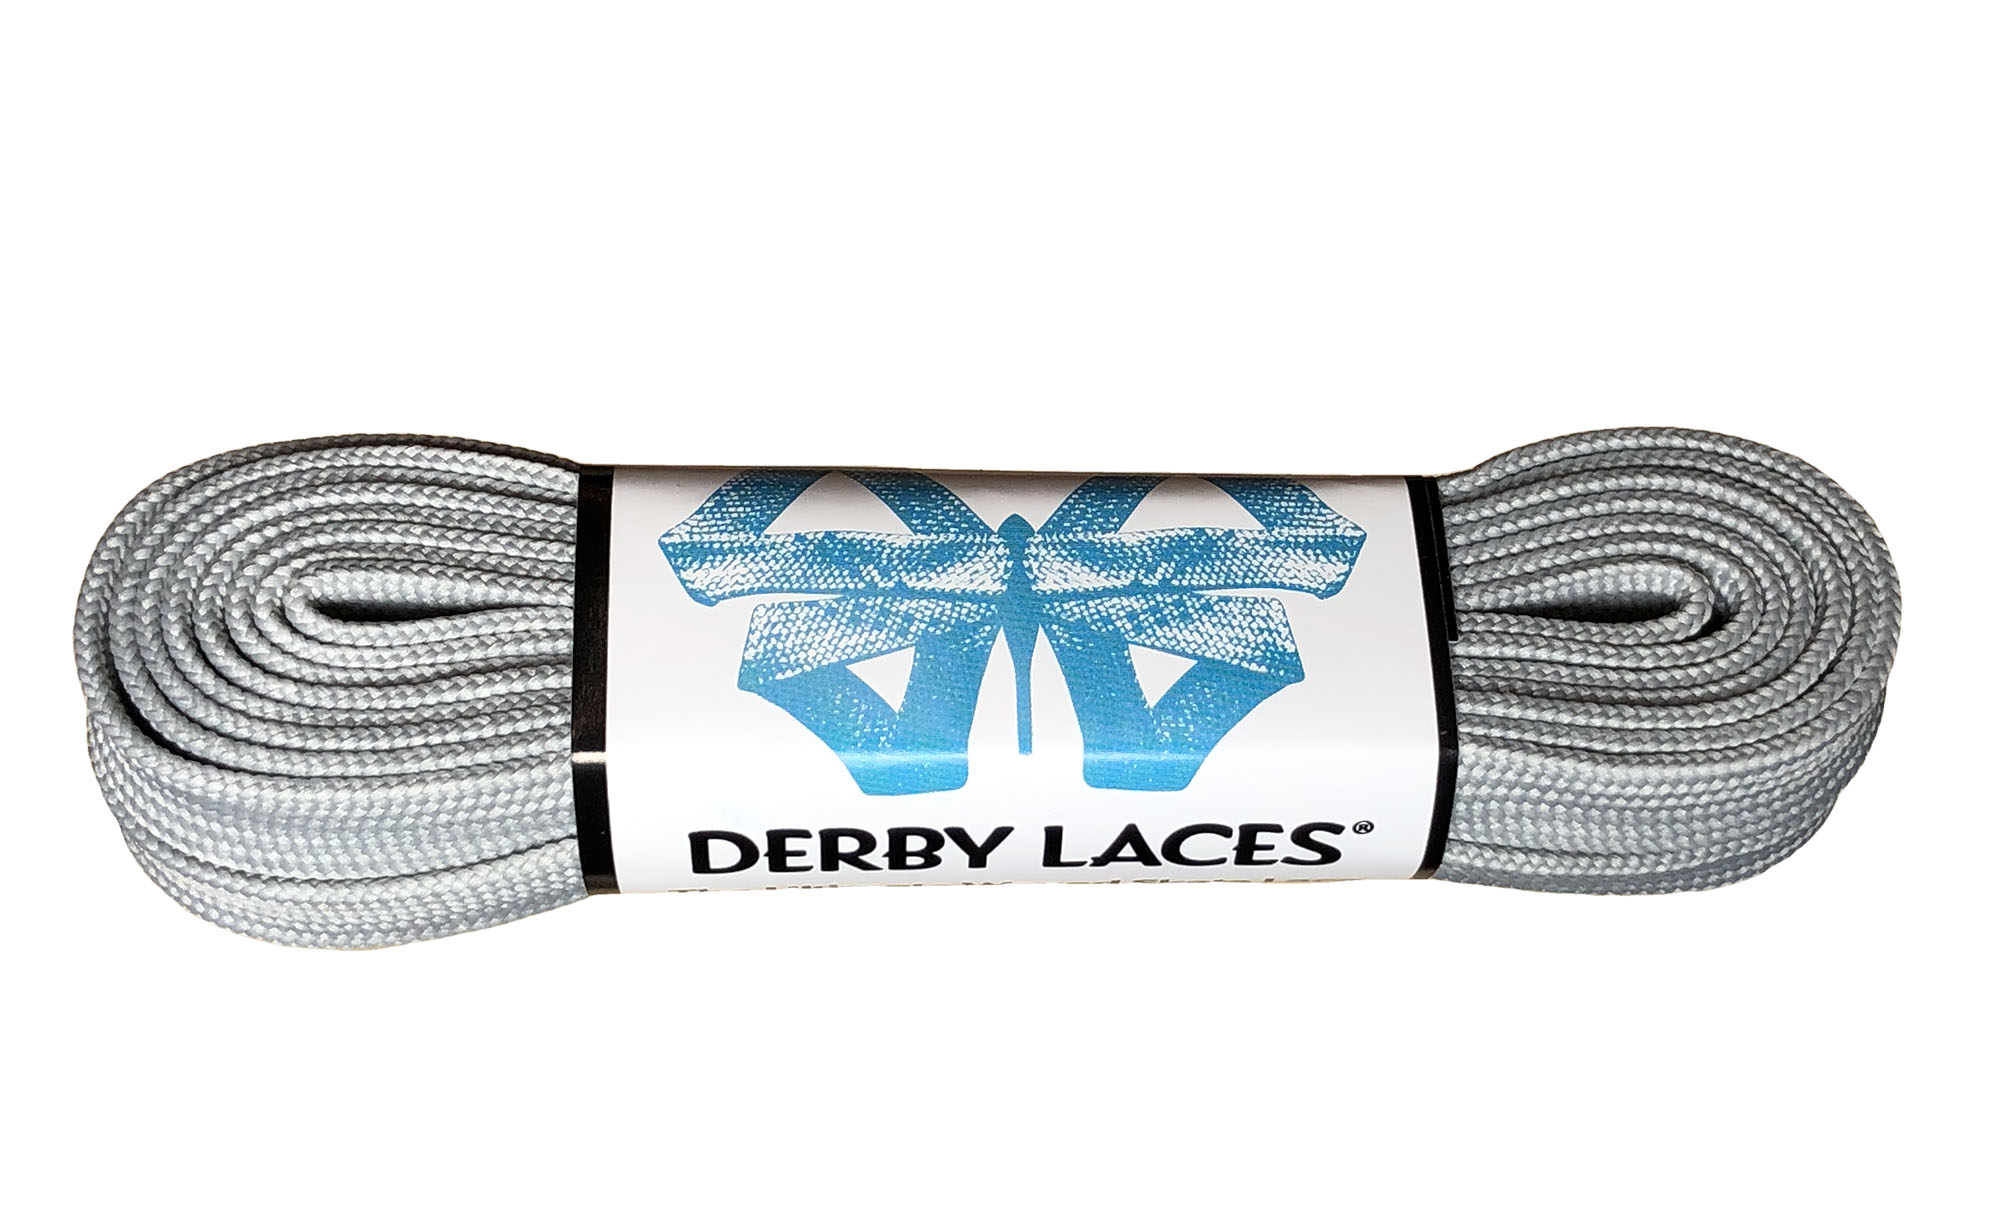 96 72 White Derby Laces Waxed Roller Derby Skate Lace in 60 or 108 Inches 84 